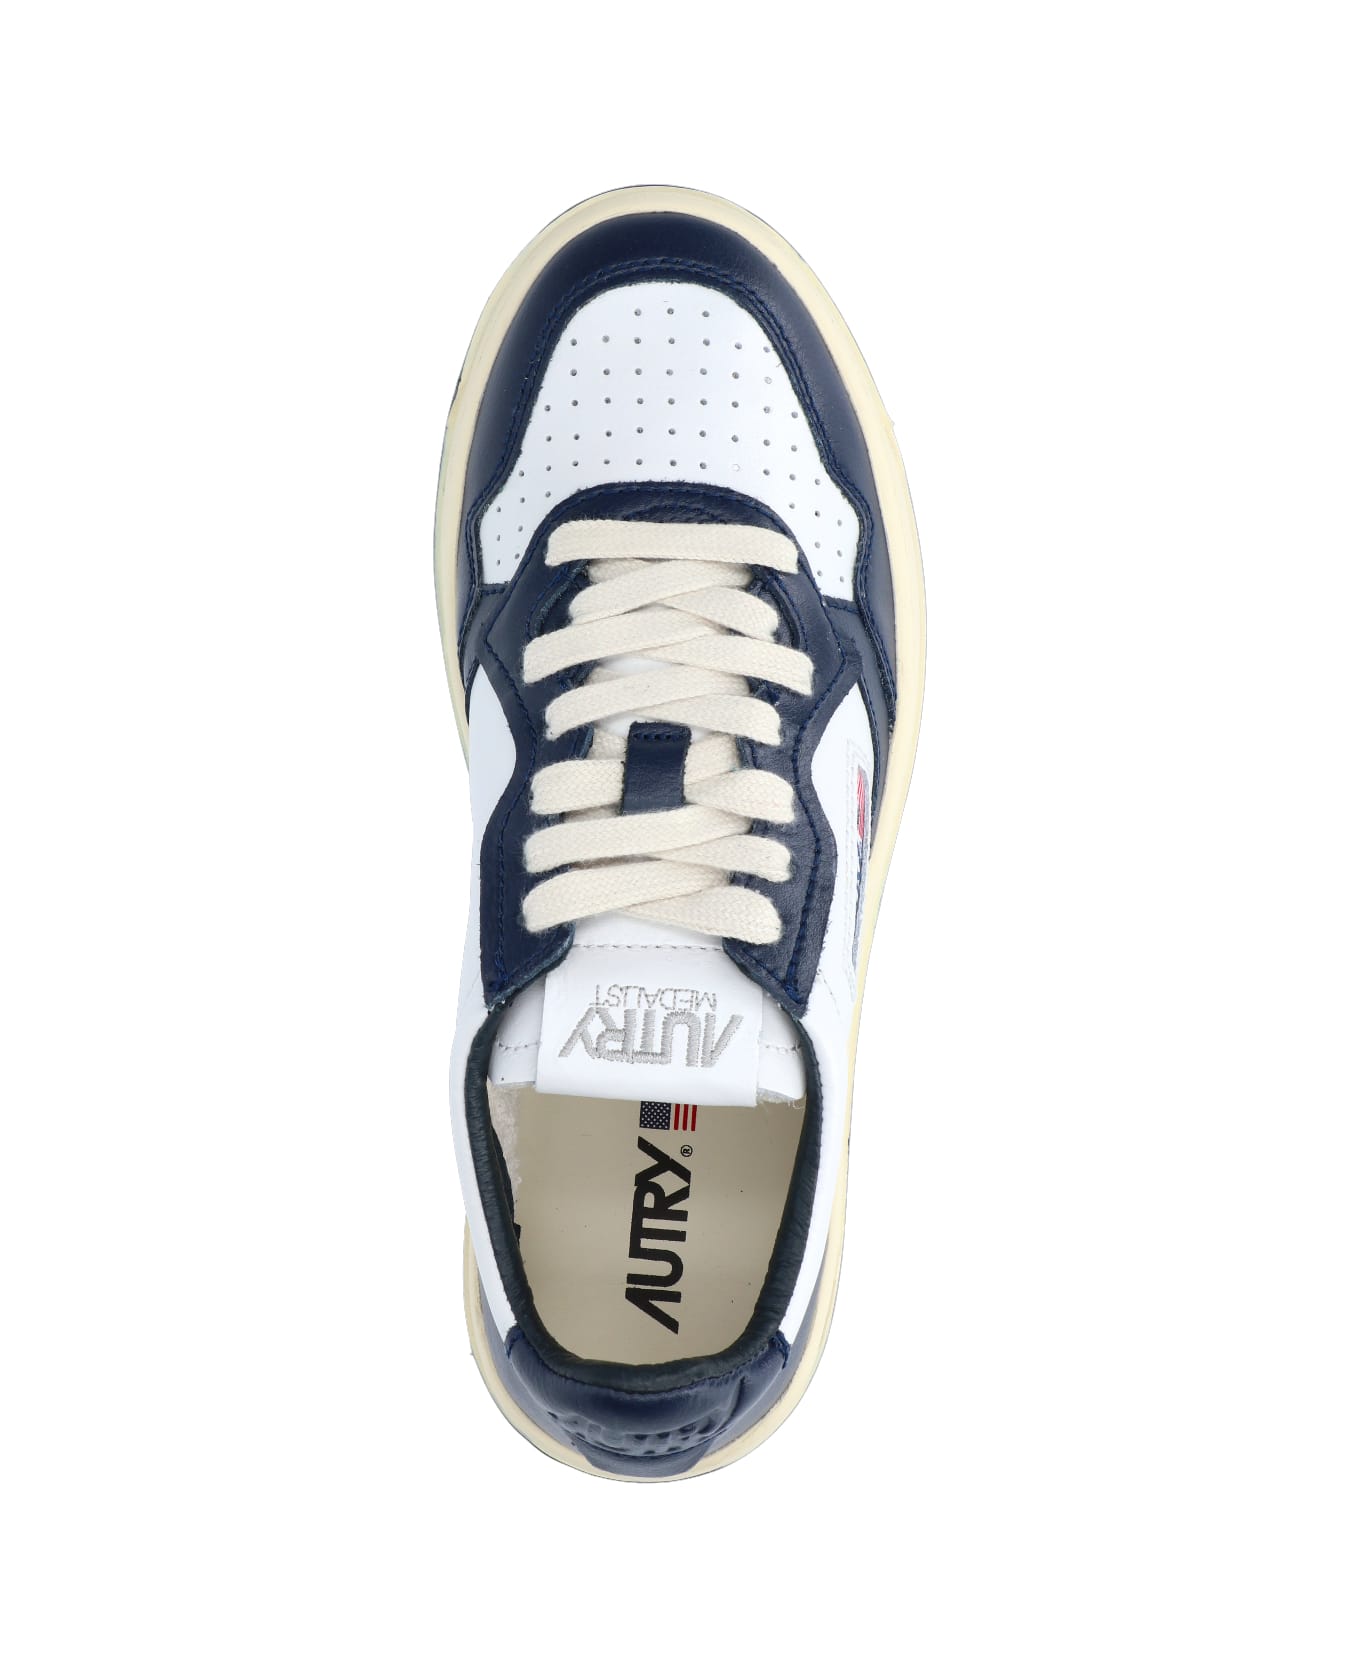 Autry Low "medalist" Sneakers - Blue スニーカー